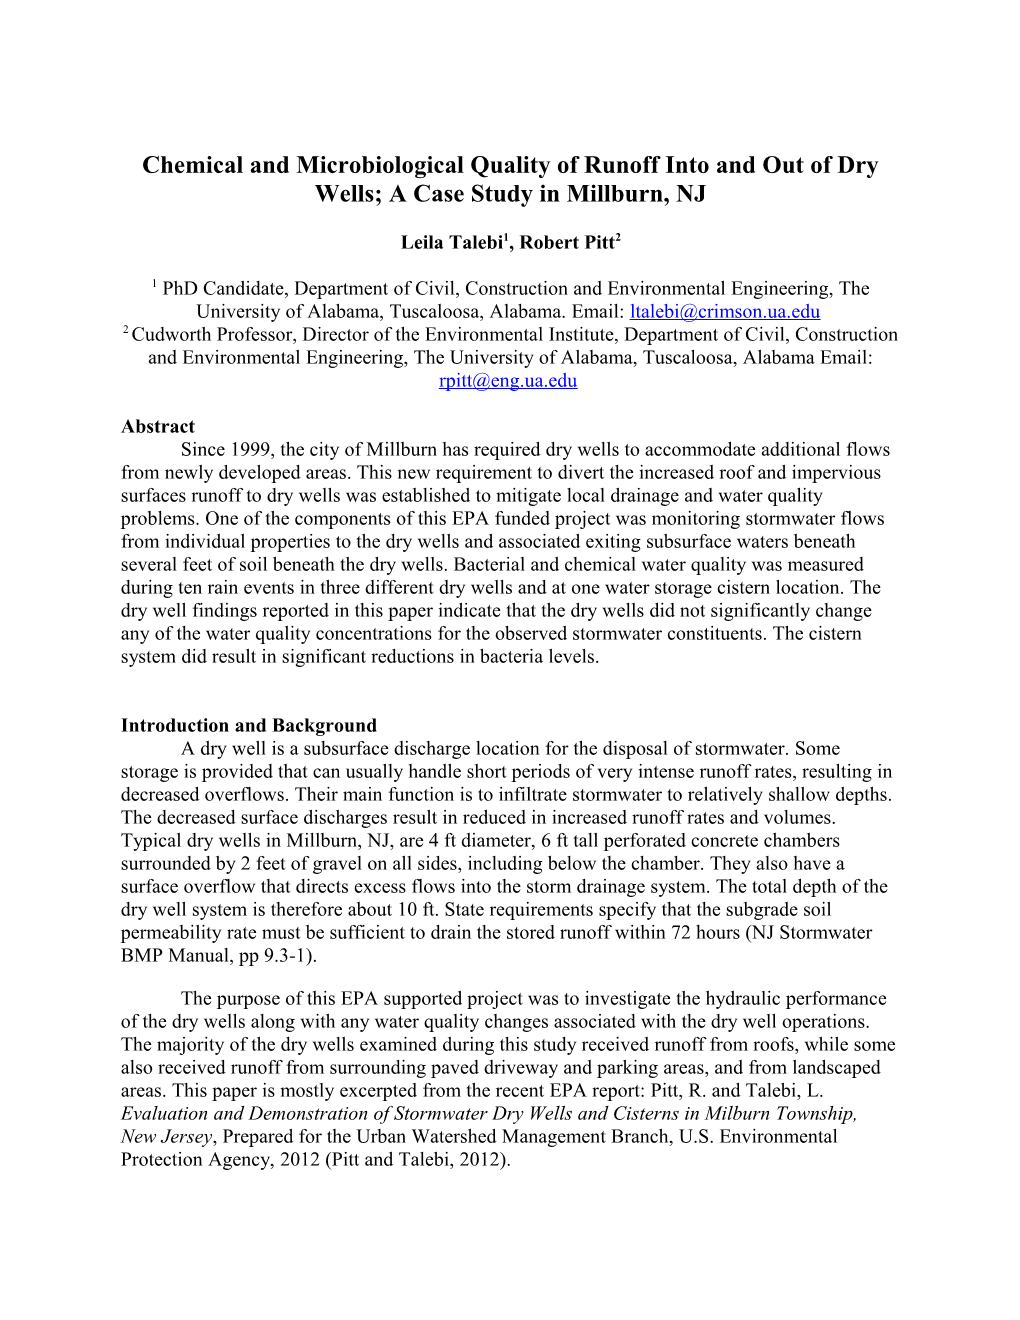 Chemical and Microbiological Quality of Runoff Into and out of Dry Wells; a Case Study